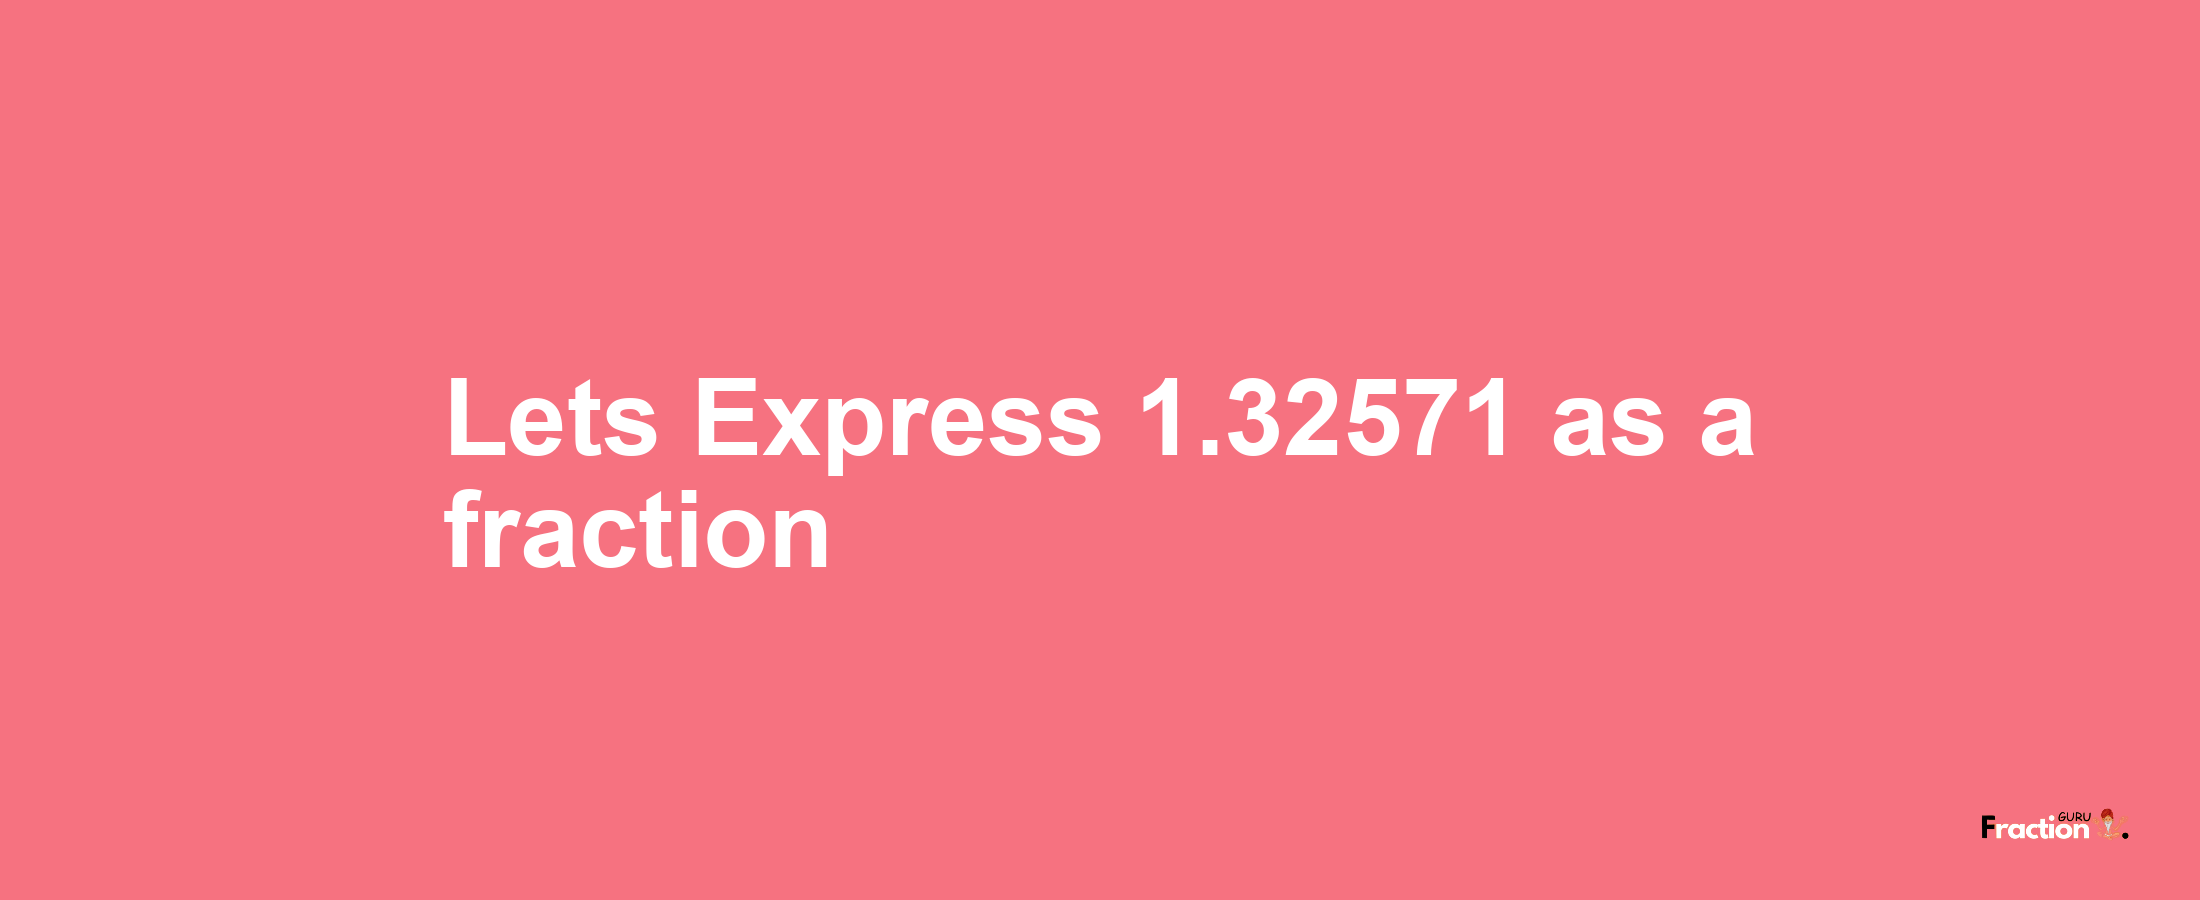 Lets Express 1.32571 as afraction